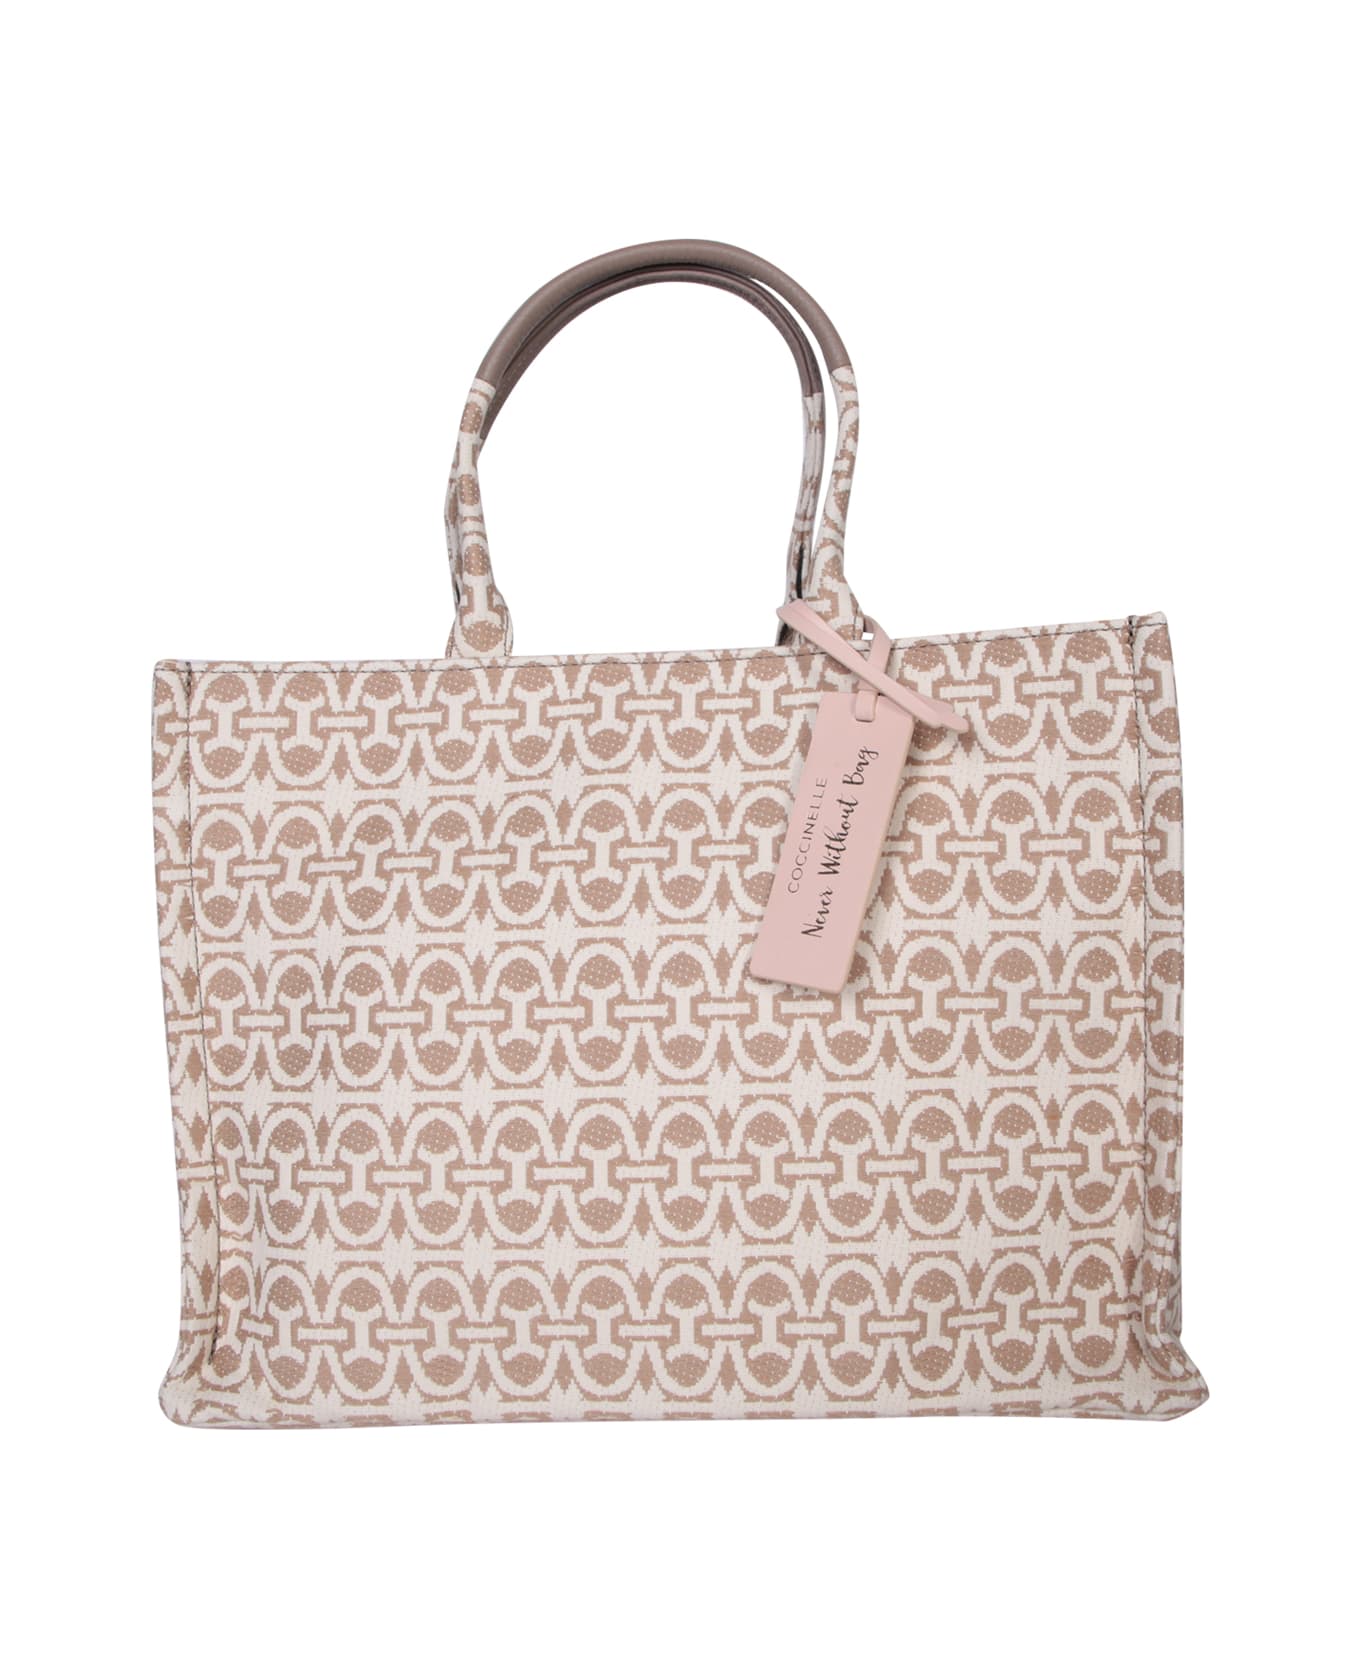 Coccinelle Beige And White Tote Bag - Beige